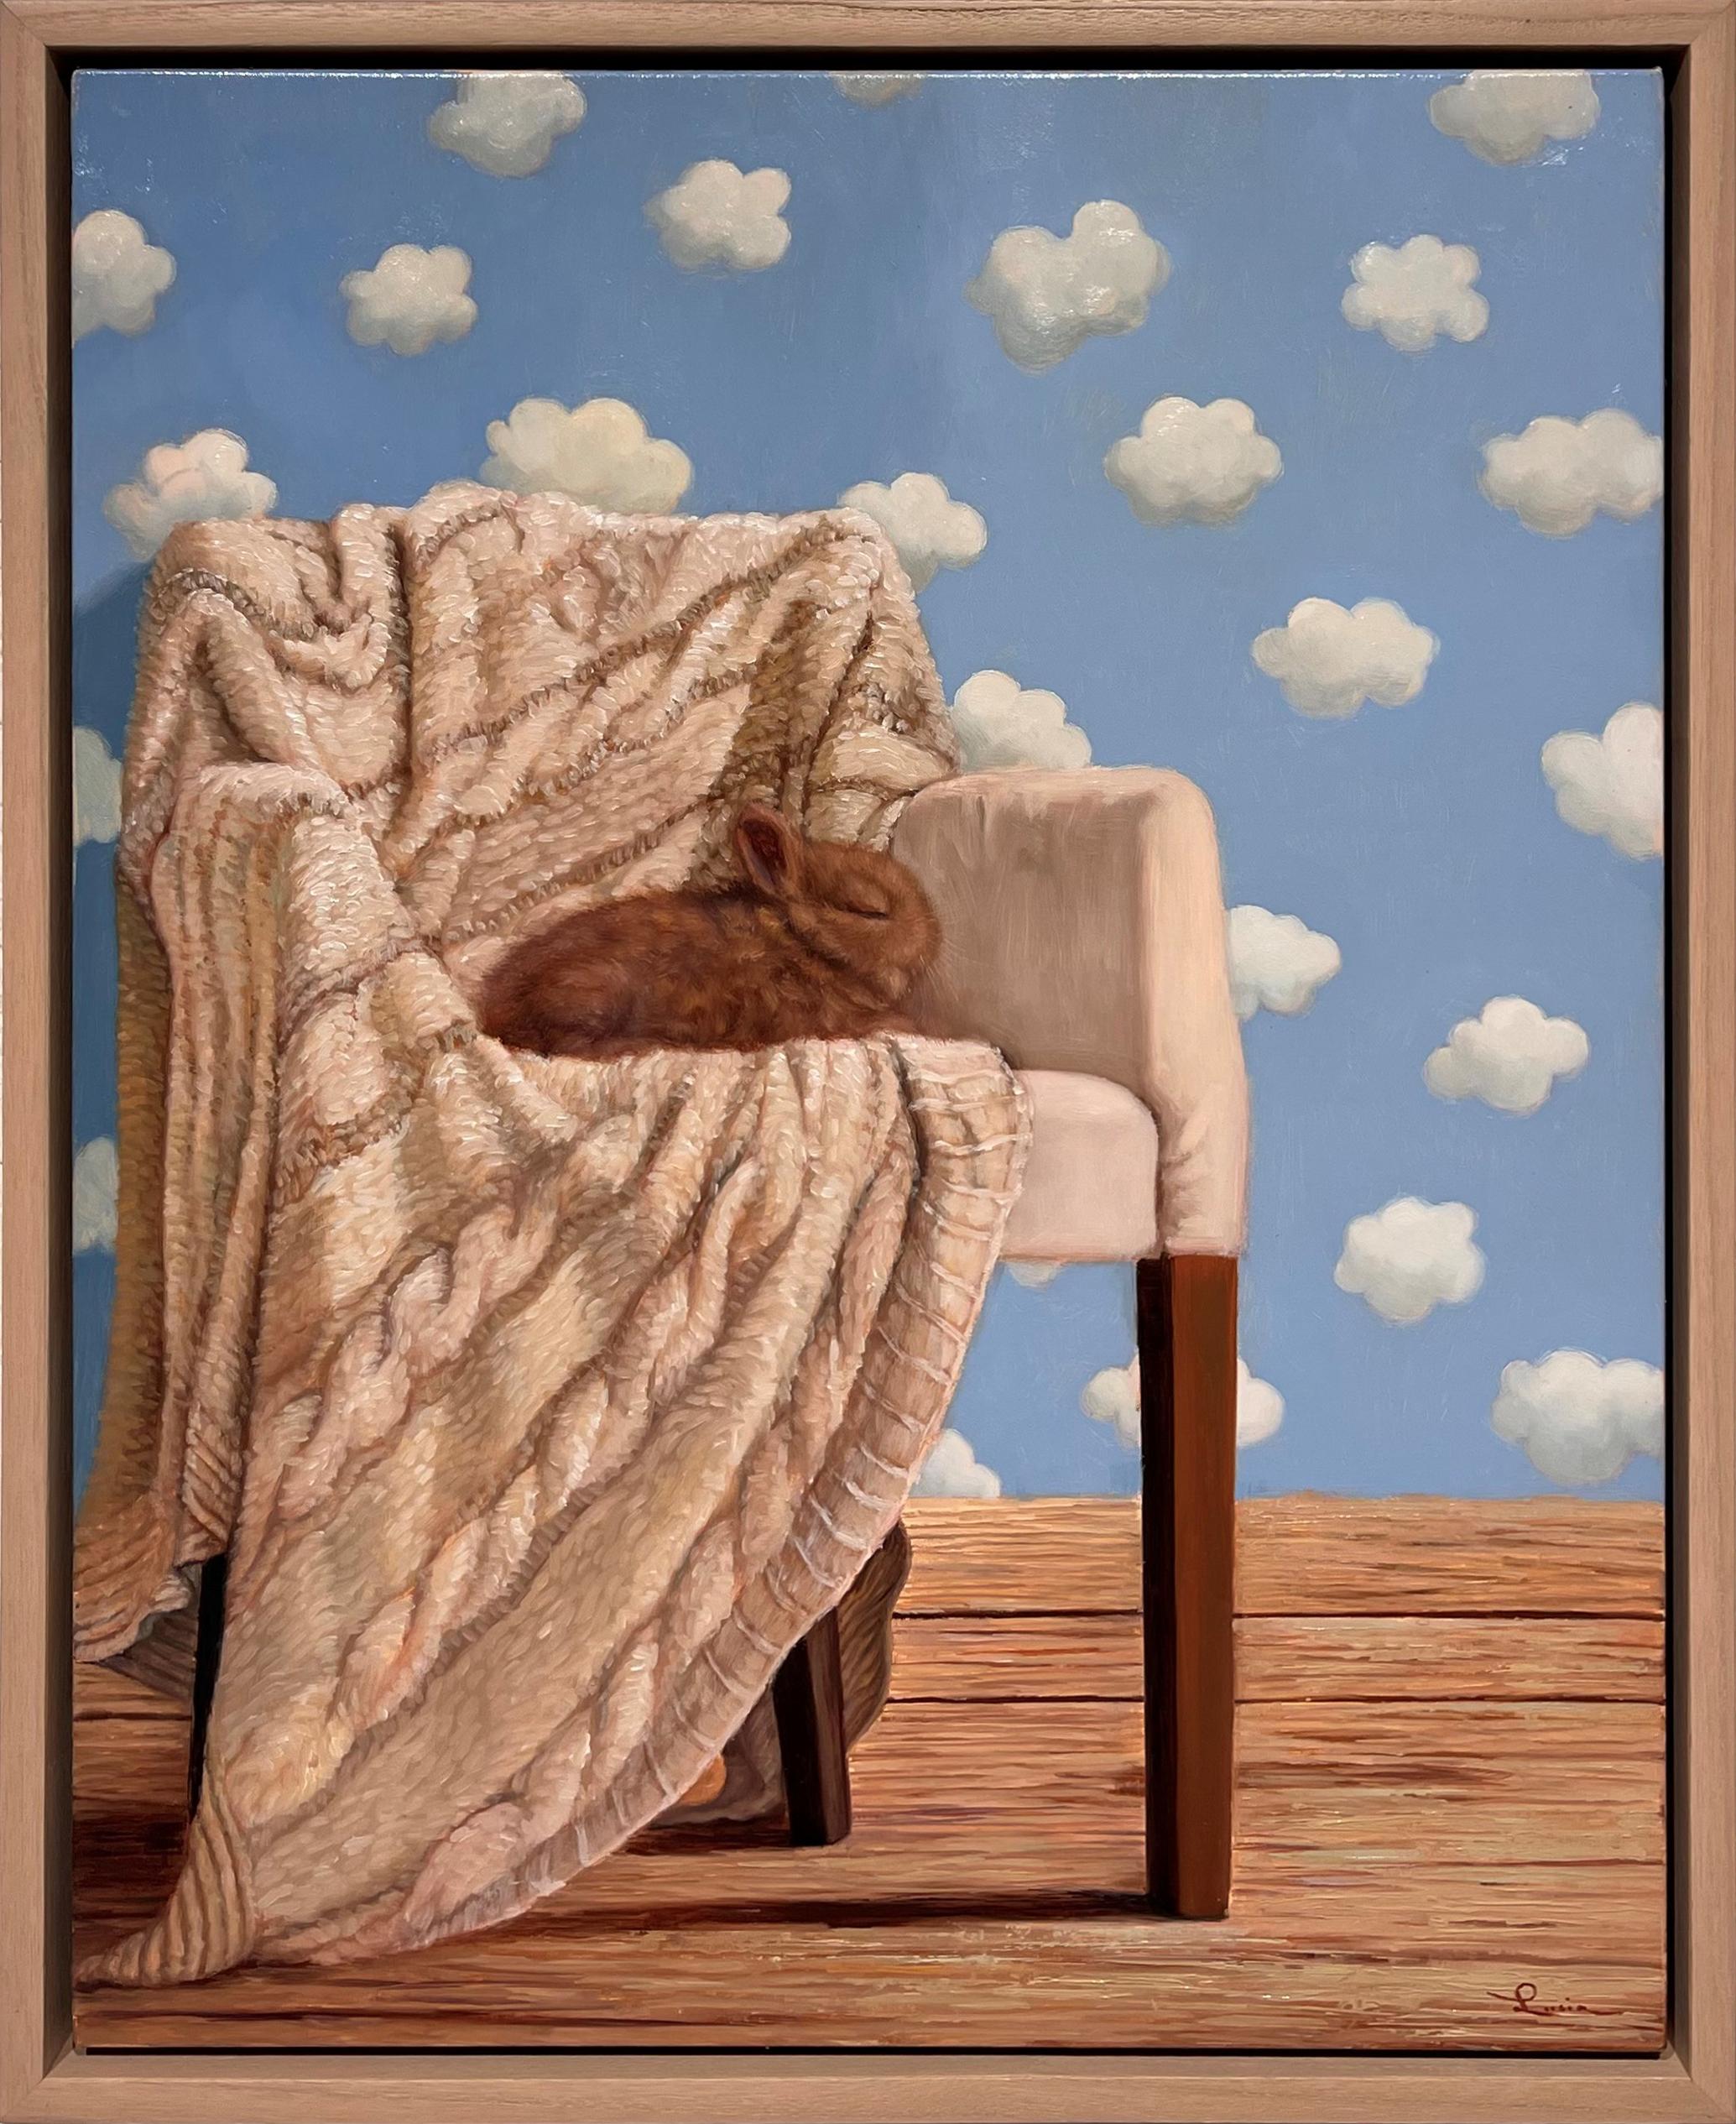 Lucia Heffernan Figurative Painting - "Dreamer" - Bunny Nap Oil Painting with Cloud Wallpaper Backdrop